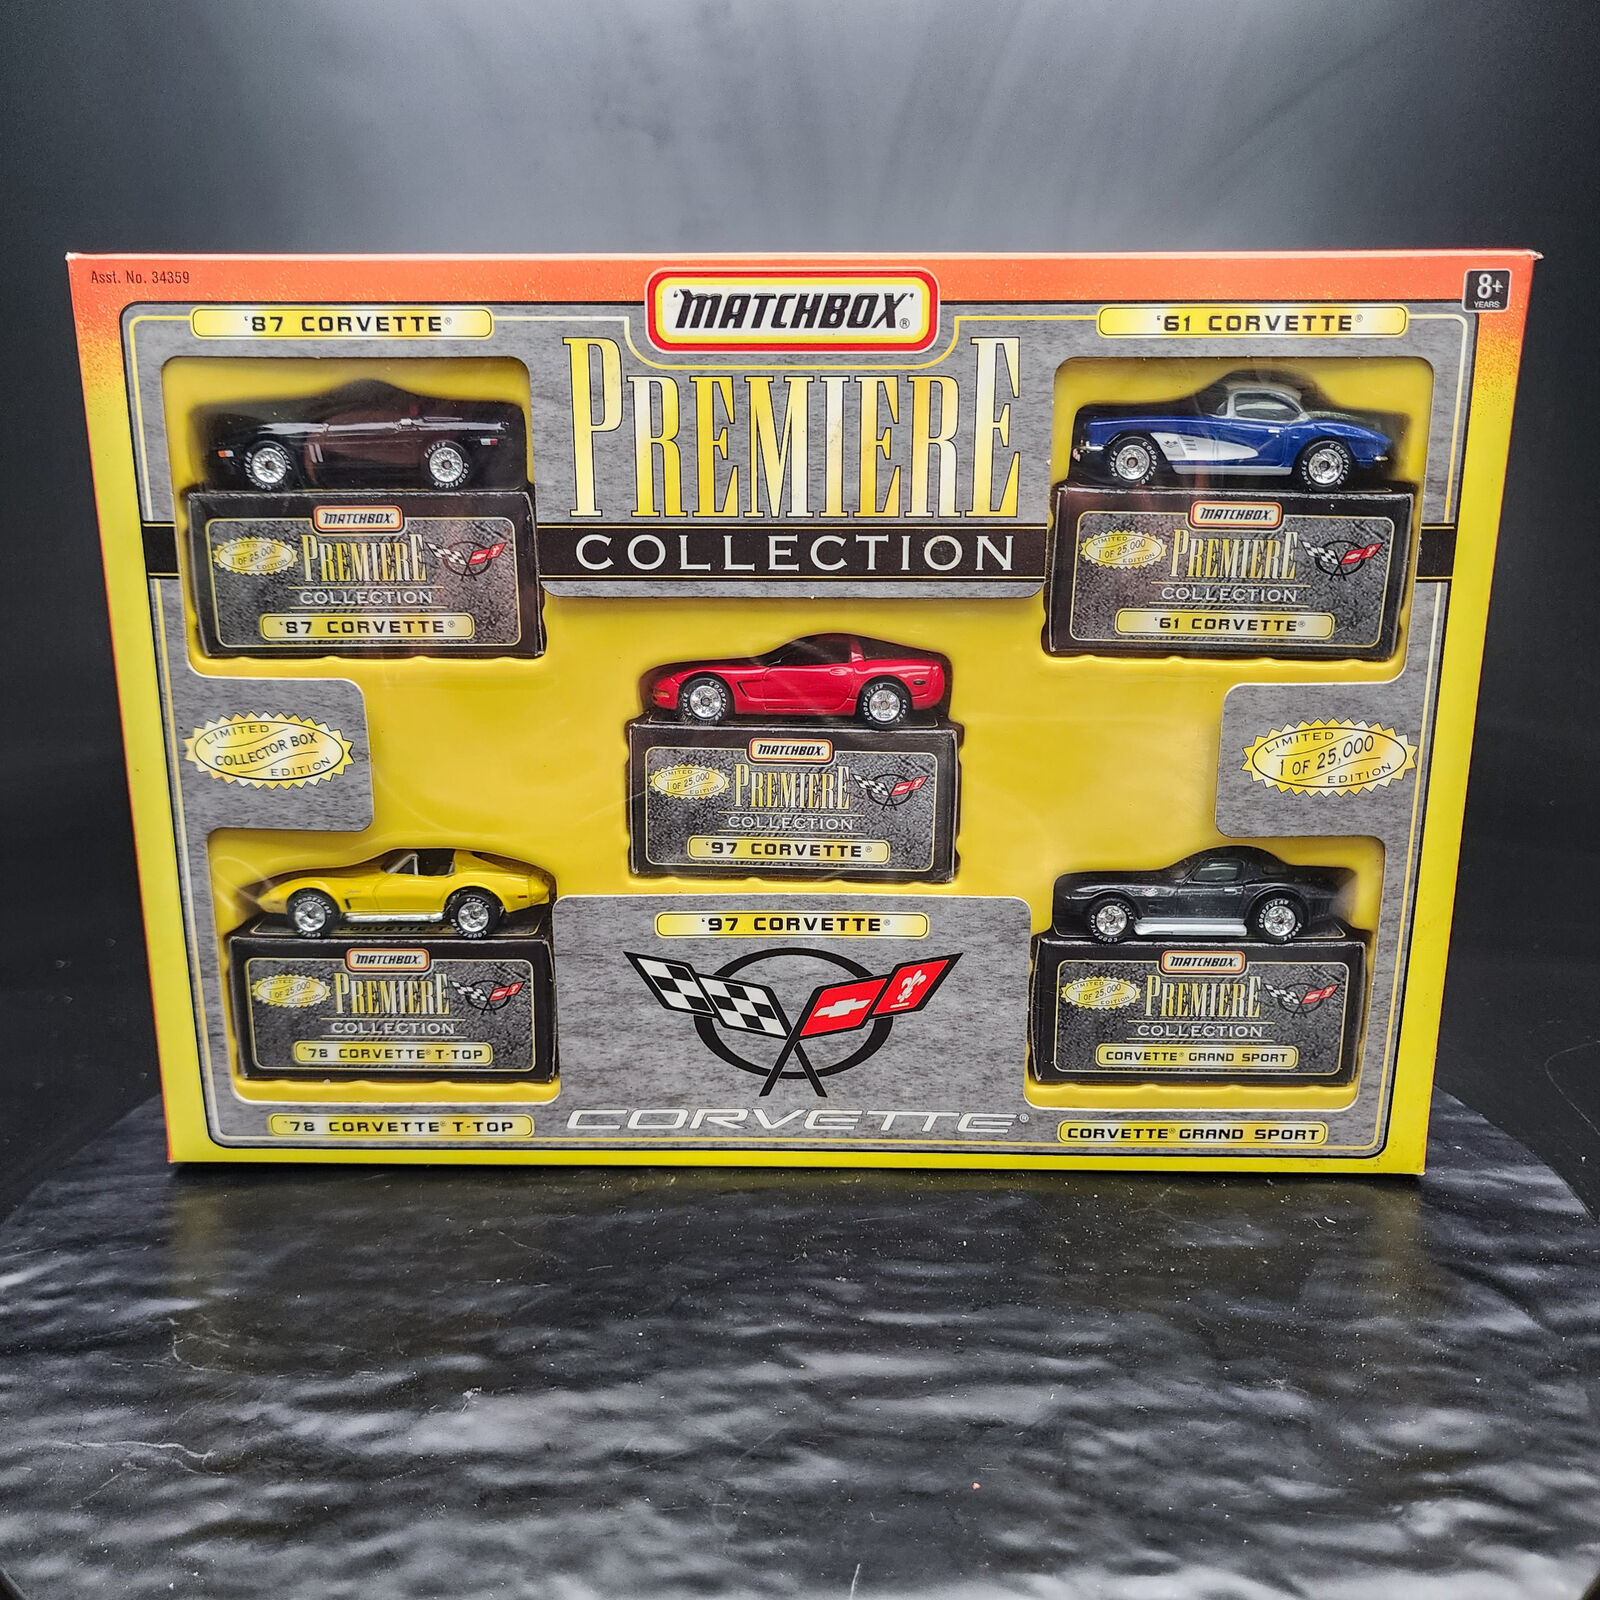 Matchbox Premiere Collection Corvette Limited Edition Collector\'s Box Set of 5